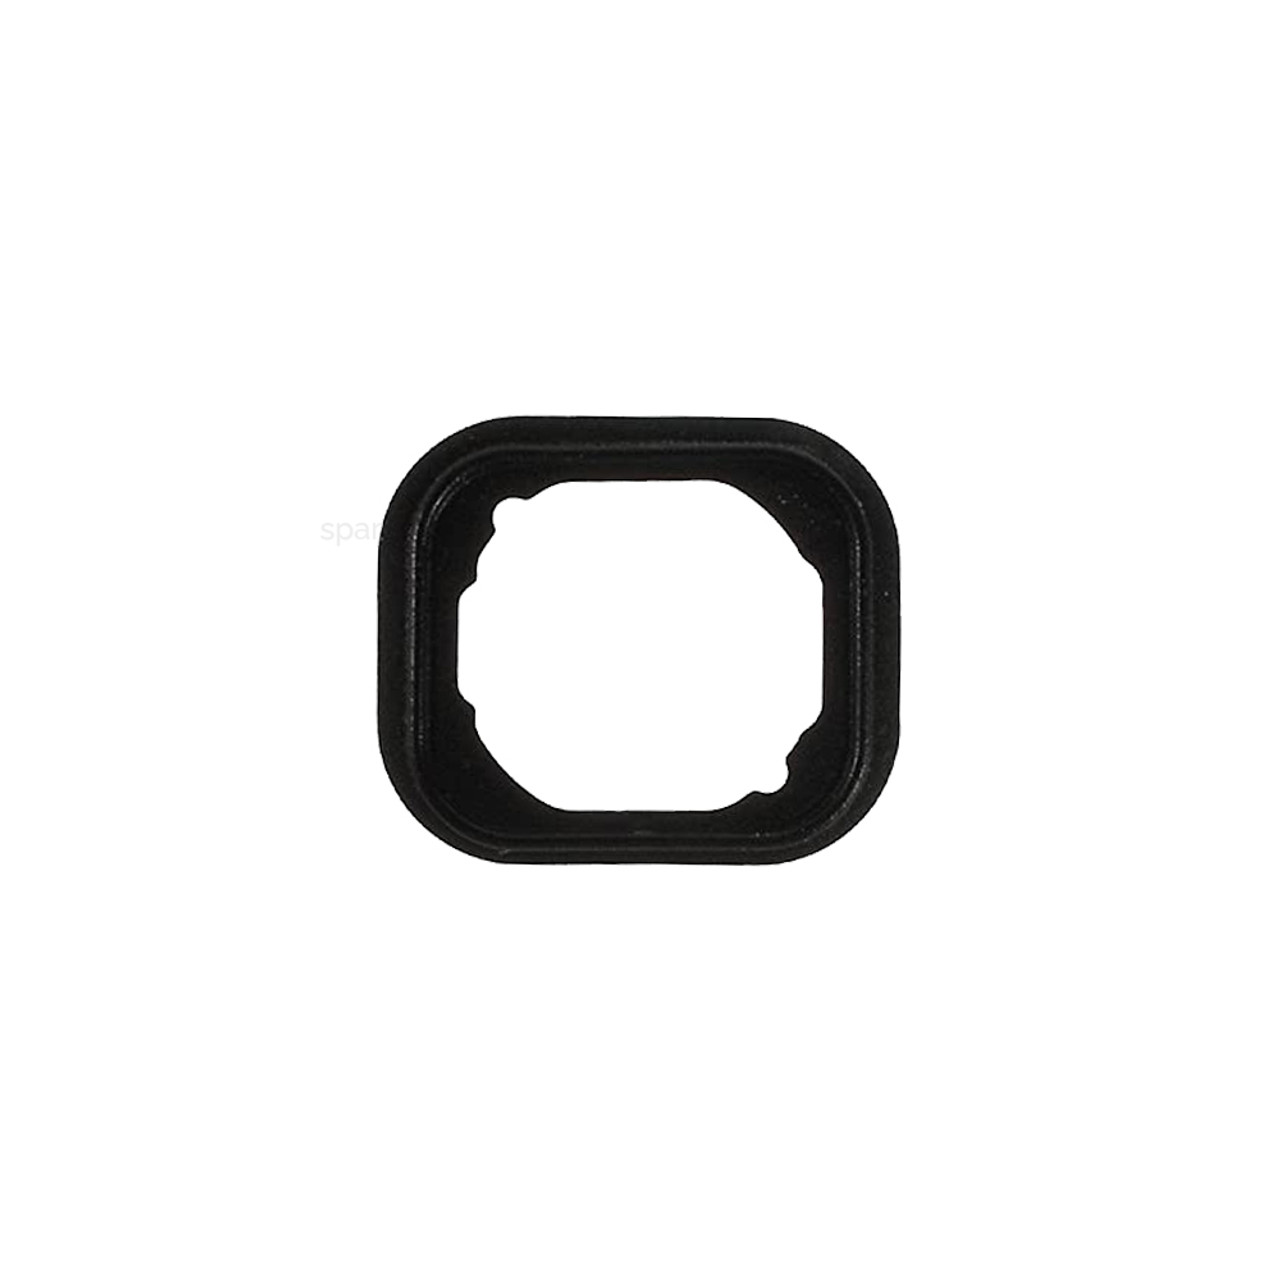 iPhone 6S Plus Home Button Rubber Gasket  Replacement